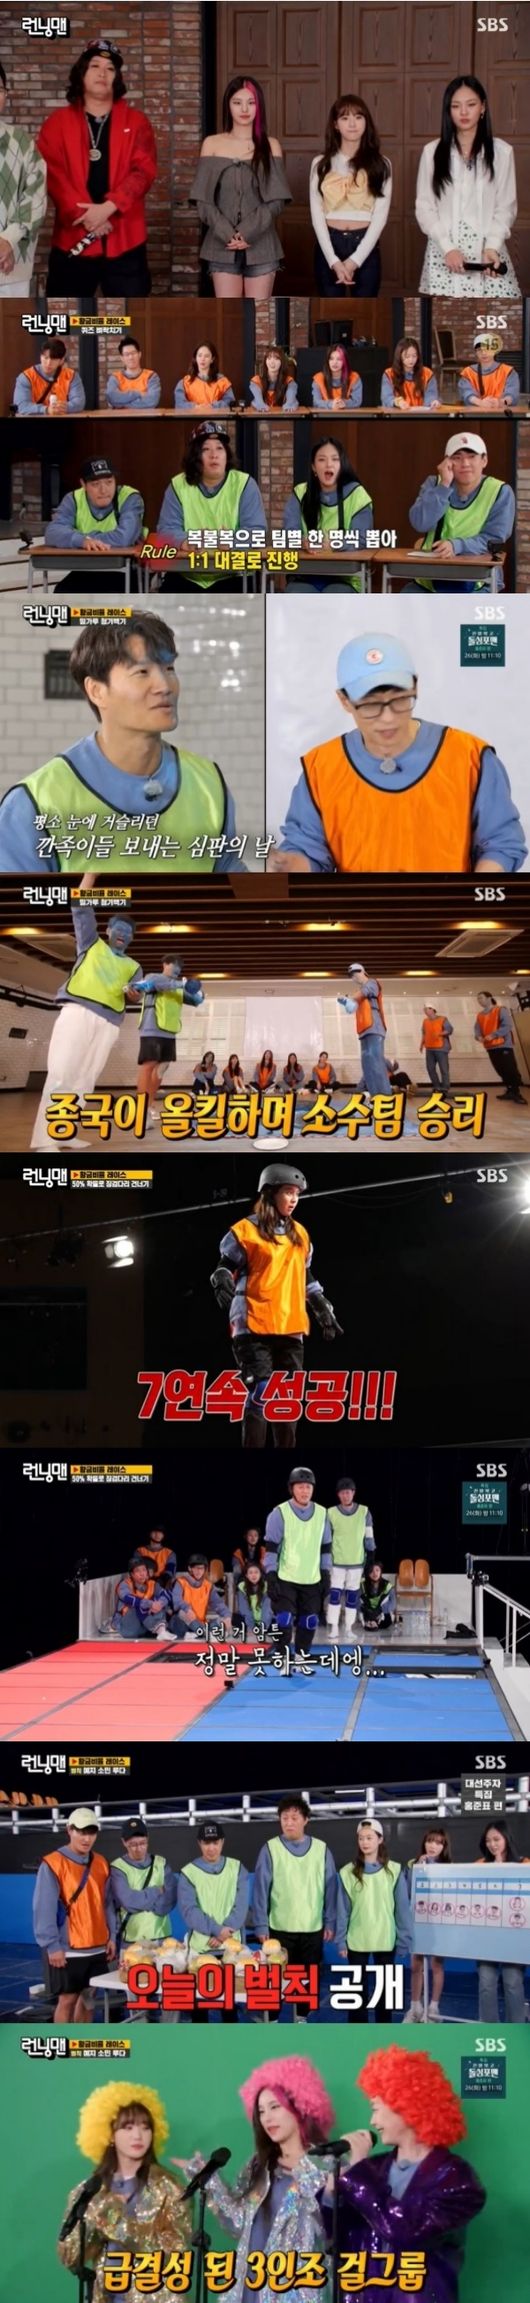 Running Man surpassed the highest audience rating of 10% per minute and kept the number one audience rating in the same time zone.24 Days SBS entertainment program Running Man ranked first in entertainment in the same time zone with an average audience rating of 5.9% (based on Nielsen Korea Seoul Capital Area, household), and the highest audience rating per minute jumped to 10.3%, and the 2049 audience rating also jumped to 3.2% (based on Nielsen Korea Seoul Capital Area, household). It was number one.The broadcast was decorated with Golden Ratio Race, and guest Min-ji, singer Bibi, ITZY Yezi and WJSN Luda, representing the MZ generation, joined together.The members cheered all the guest appearances, but they laughed at the appearance of Min-ji.The Golden Ratio Race was a quiz showdown in which one captain gave the number while conducting the keyword mission every round, and PD drew a number to decide the team.Kim Jong-kook became the captain, while Yang Se-chan, Haha, MC Min-ji and Bibi became a minority team of empties.However, the quiz showdown was unexpected and a minority team won.The second race was teamed with Kim Jong-kook, with Ji Suk-jin being selected as the captain and PD picking up two.The showdown of Somewhere Sick Hearing White Age unfolded and the appearance of absolute strongman Kim Jong-kook left many teams in fear.This game, which had to be punched with flour buried and ordered by MC, was a game in favor of Kim Jong-kook, who was ahead of power.Among them, Kim Jong-kook and Min-ji were the big laughs. Kim Jong-kook said, Even if you swing, it fits well.The face area is wide, and Min-ji laughed, It hurts a little, is not this a funny game?Eventually, Min-ji didnt hit a single and the Ji Suk-jin team won.The final race had to cross the stepping stones only with a tentacle; members complained of fear in the extreme situation where they had to Choices the broken styrofoam and hard wooden-plate legs at 1/2 odds.Song Ji-hyo, the King of the Speech, was also nervous, but he overcame a huge probability battle and threw up the chorus of seven consecutive wooden legs.Yang Se-chan stepped up after the same team Bibi was eliminated immediately.Yang Se-chan laughed at his smile, saying, I will go to Kong in Gangshi mode. He went forward without hesitation, but his wooden legs broke into his unexpected knife and gave a bigger smile.The scene was the highest audience rating of 10.3% per minute, accounting for the best one minute.Thanks to Song Ji-hyos performance, Kim Jong-kooks team easily crossed the bridge, and opponents Ji Suk-jin, Min-ji, Luda, Jeon So-min, Haha and Yezi did not advance more than a step.The final result was Kim Jong-kook first, Song Ji-hyo second, and Jeon So-min, Luda and Yezi received penalties.The three penalties danced for a minute to the Min-ji, ITZY and WJSN songs with a cute makeup.The penalty video of the three penalty players who turned into a three-member new girl group will be released through the official Instagram Reels of Running Man.SBS is provided.